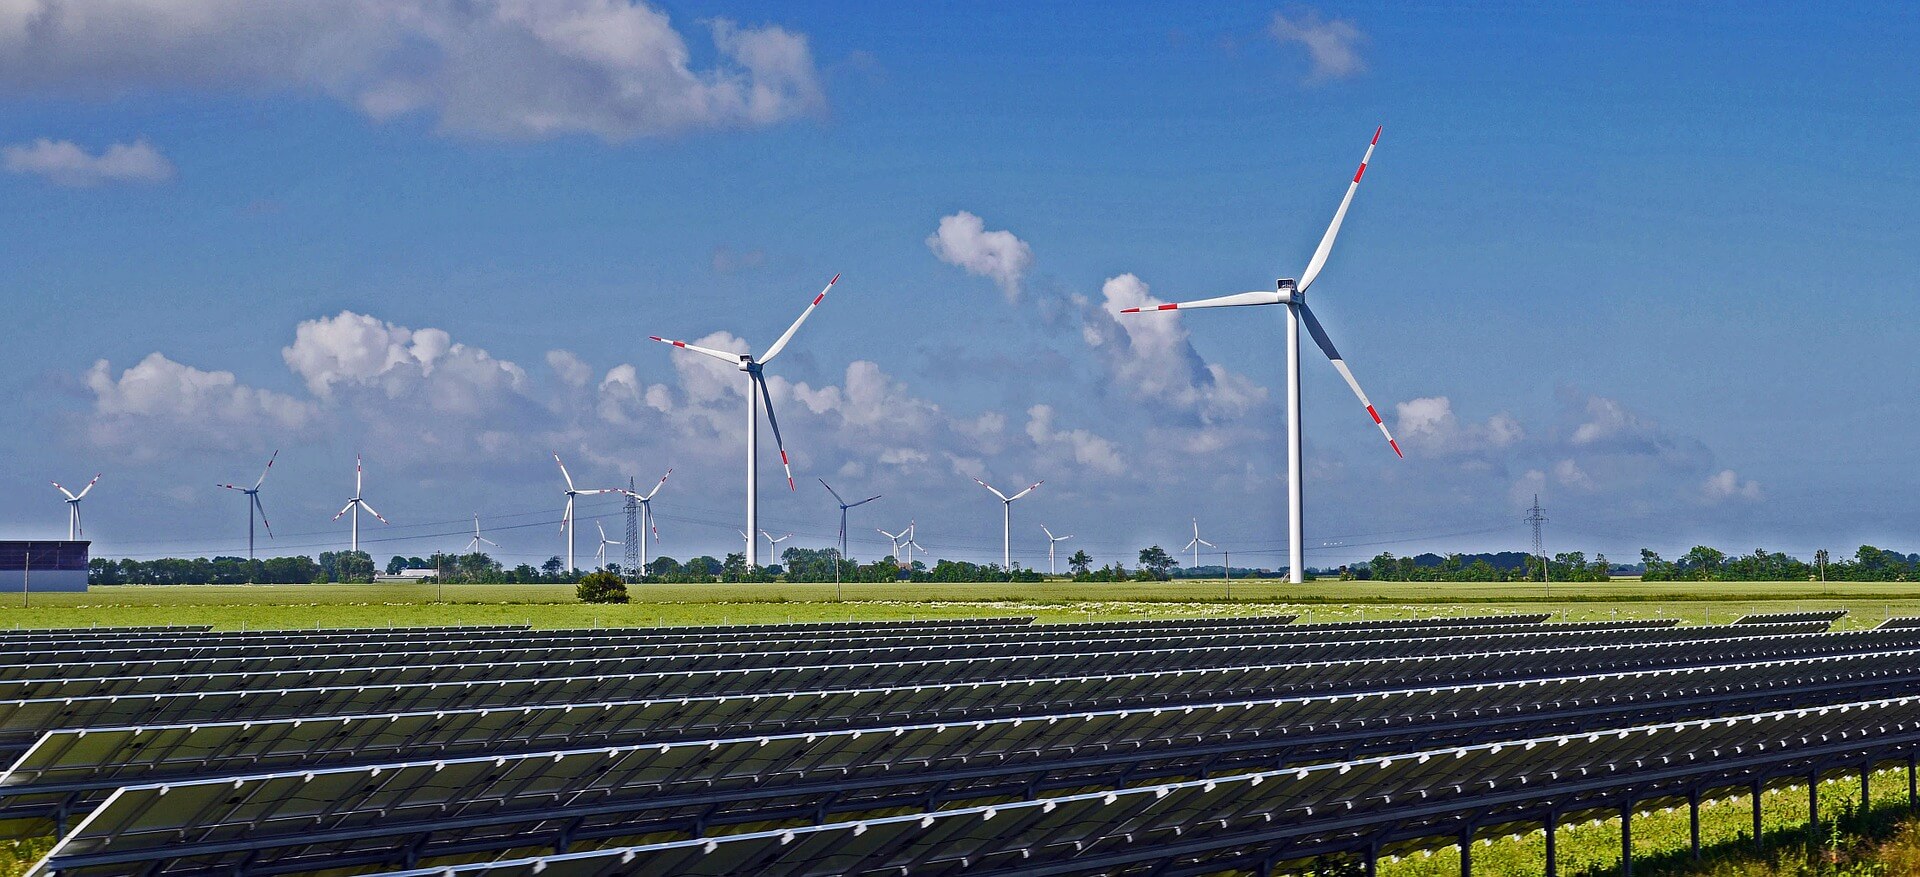 Are Third World Countries Investing more in Renewable Energy?